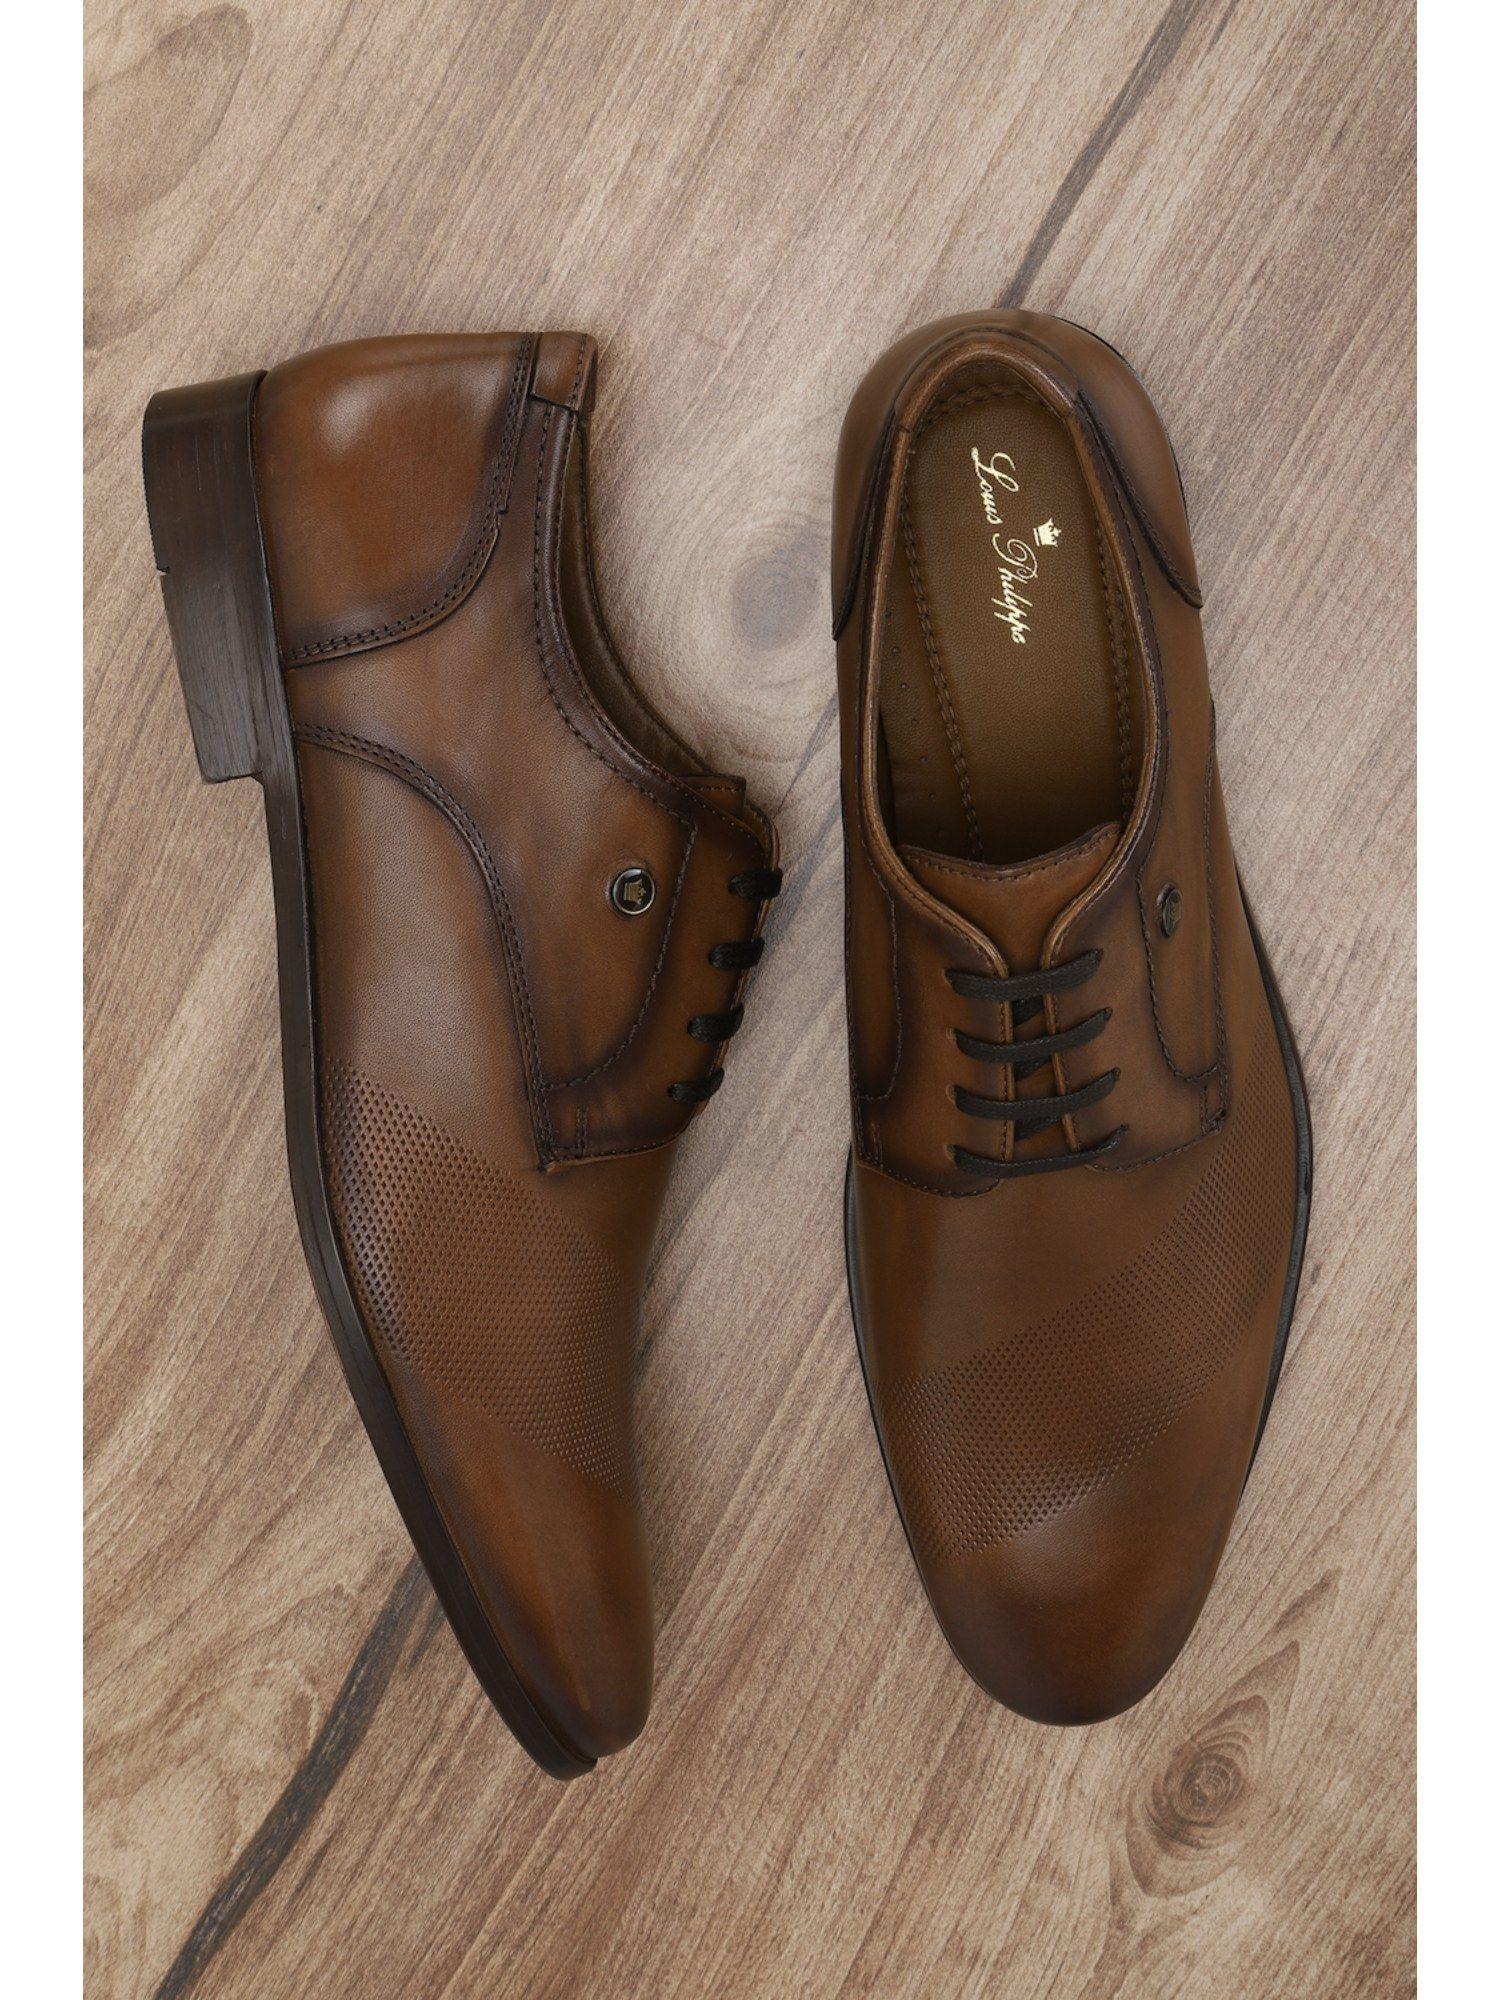 brown lace up shoes